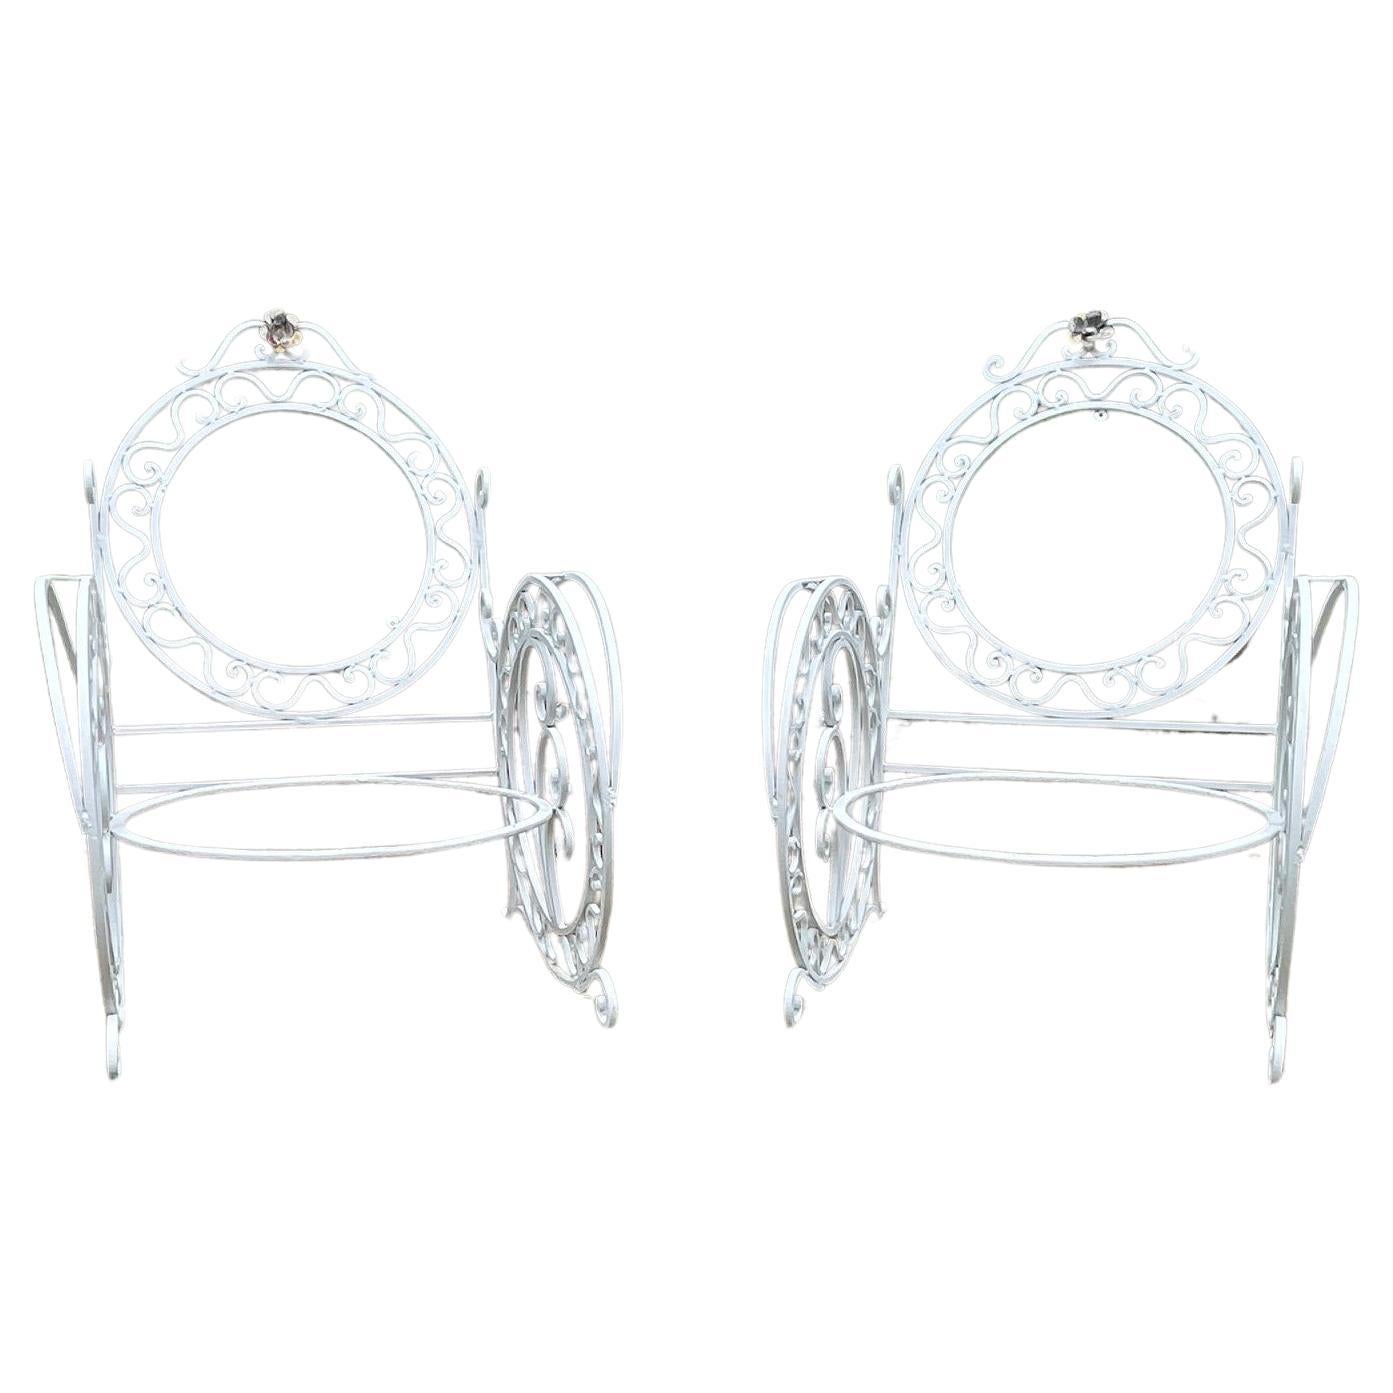 Late 19th Century Wrought Iron French Chairs - a Pair